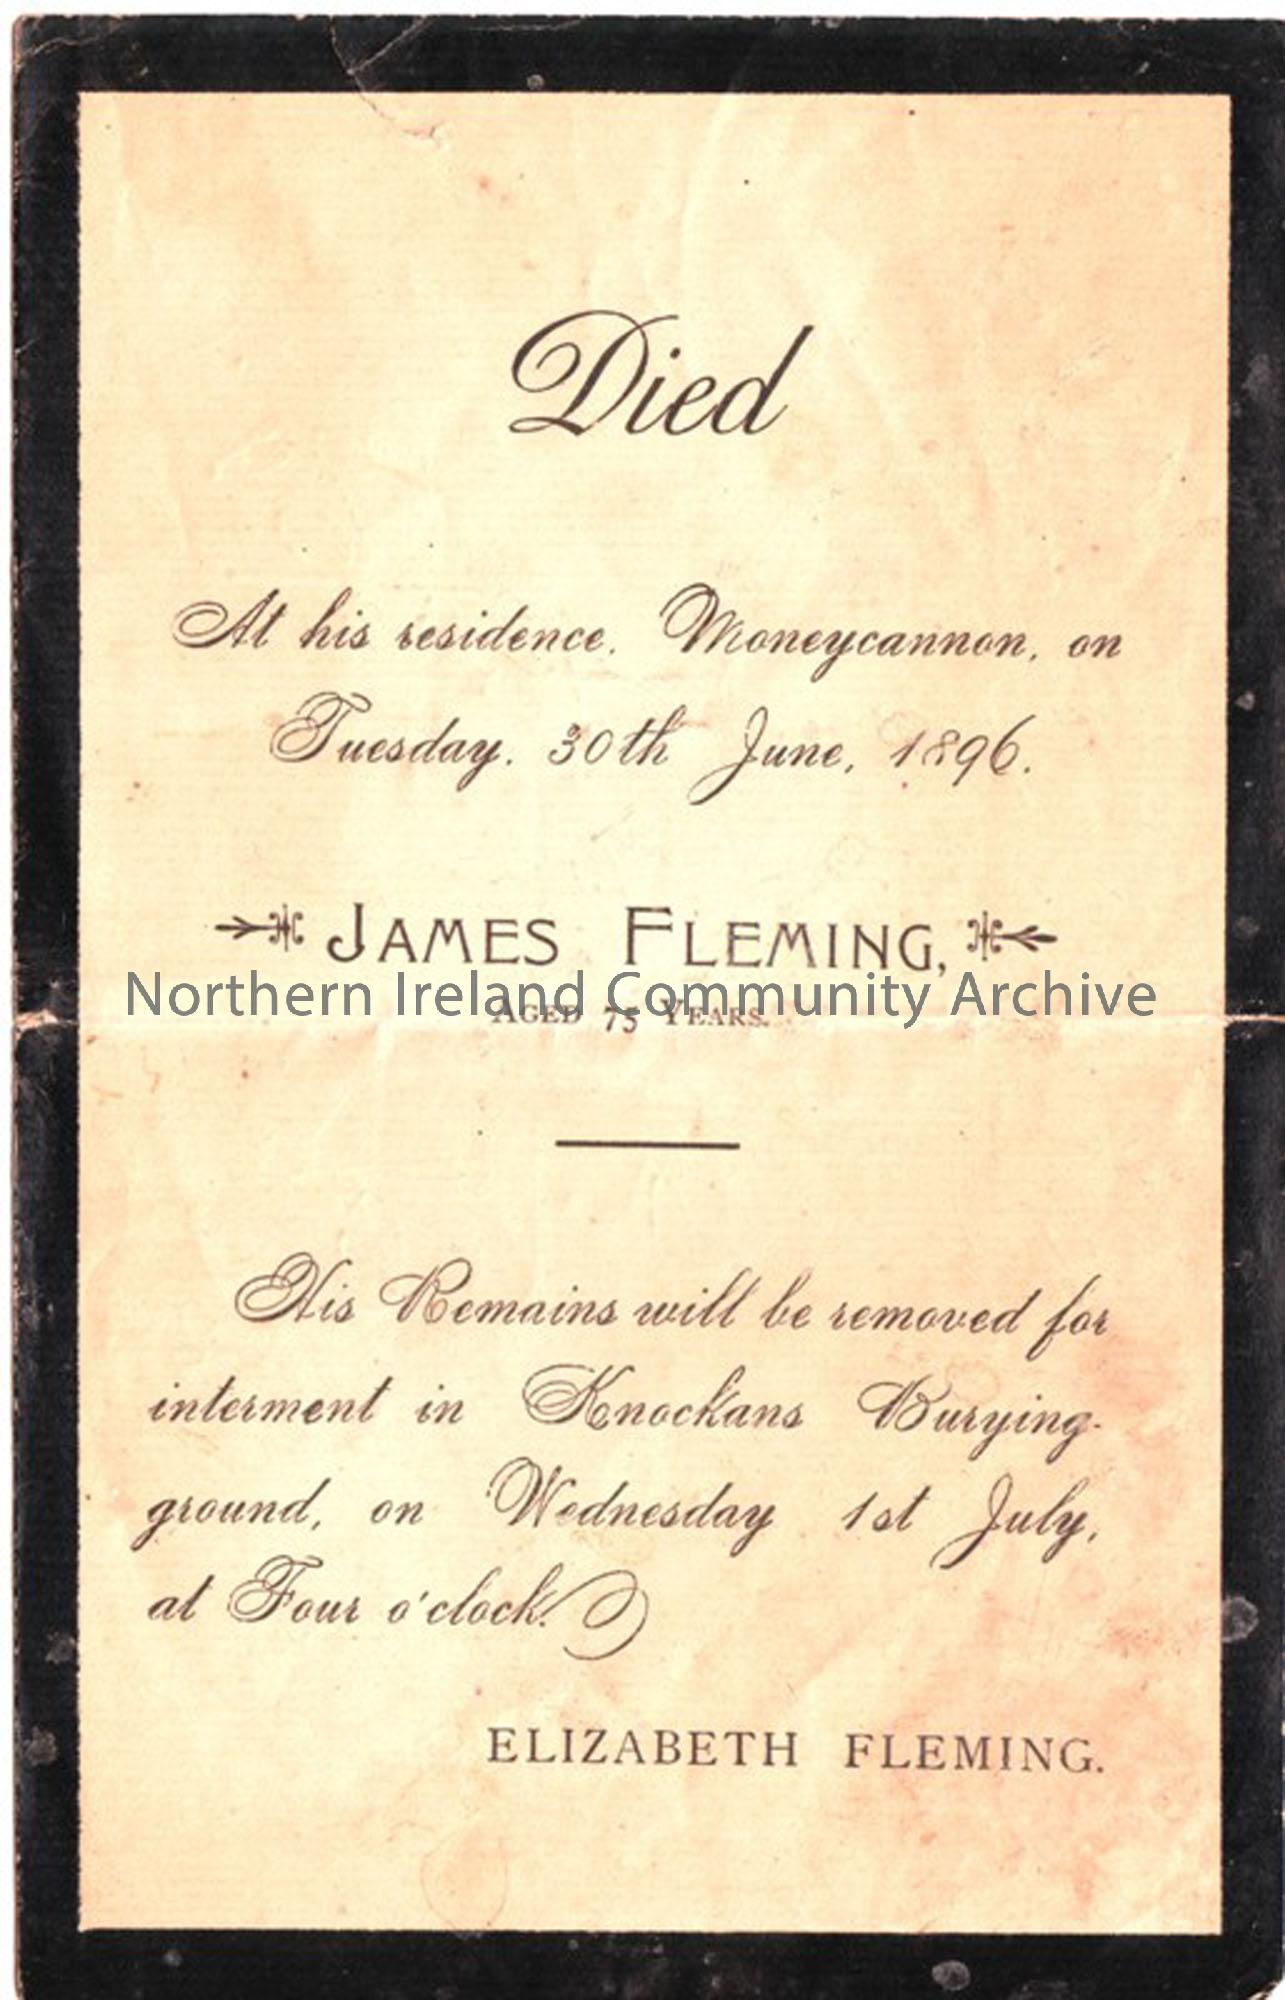 James Fleming of Moneycannon, buried in Knockans Burying Ground d. 30th June 1896, aged 75 years